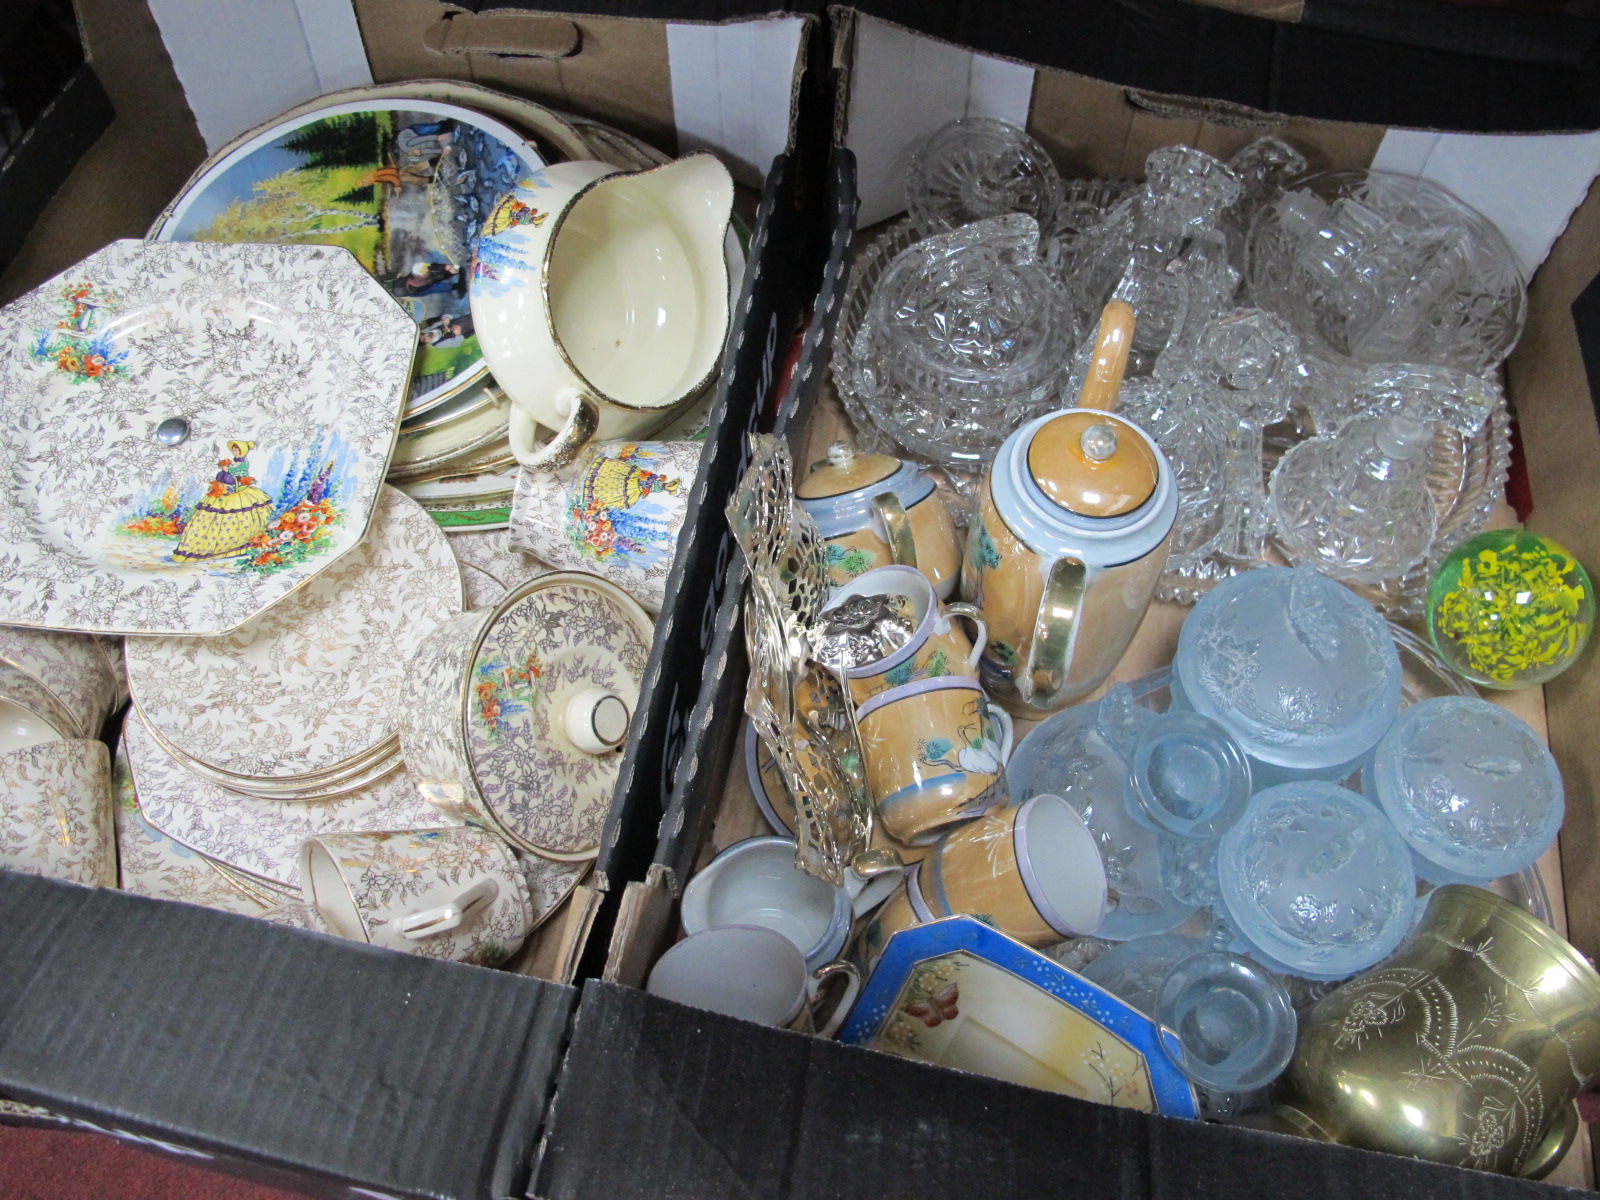 Bewley Crinoline Lady Table Pottery, meat plates, Japanese coffee ware, glass trinket sets (